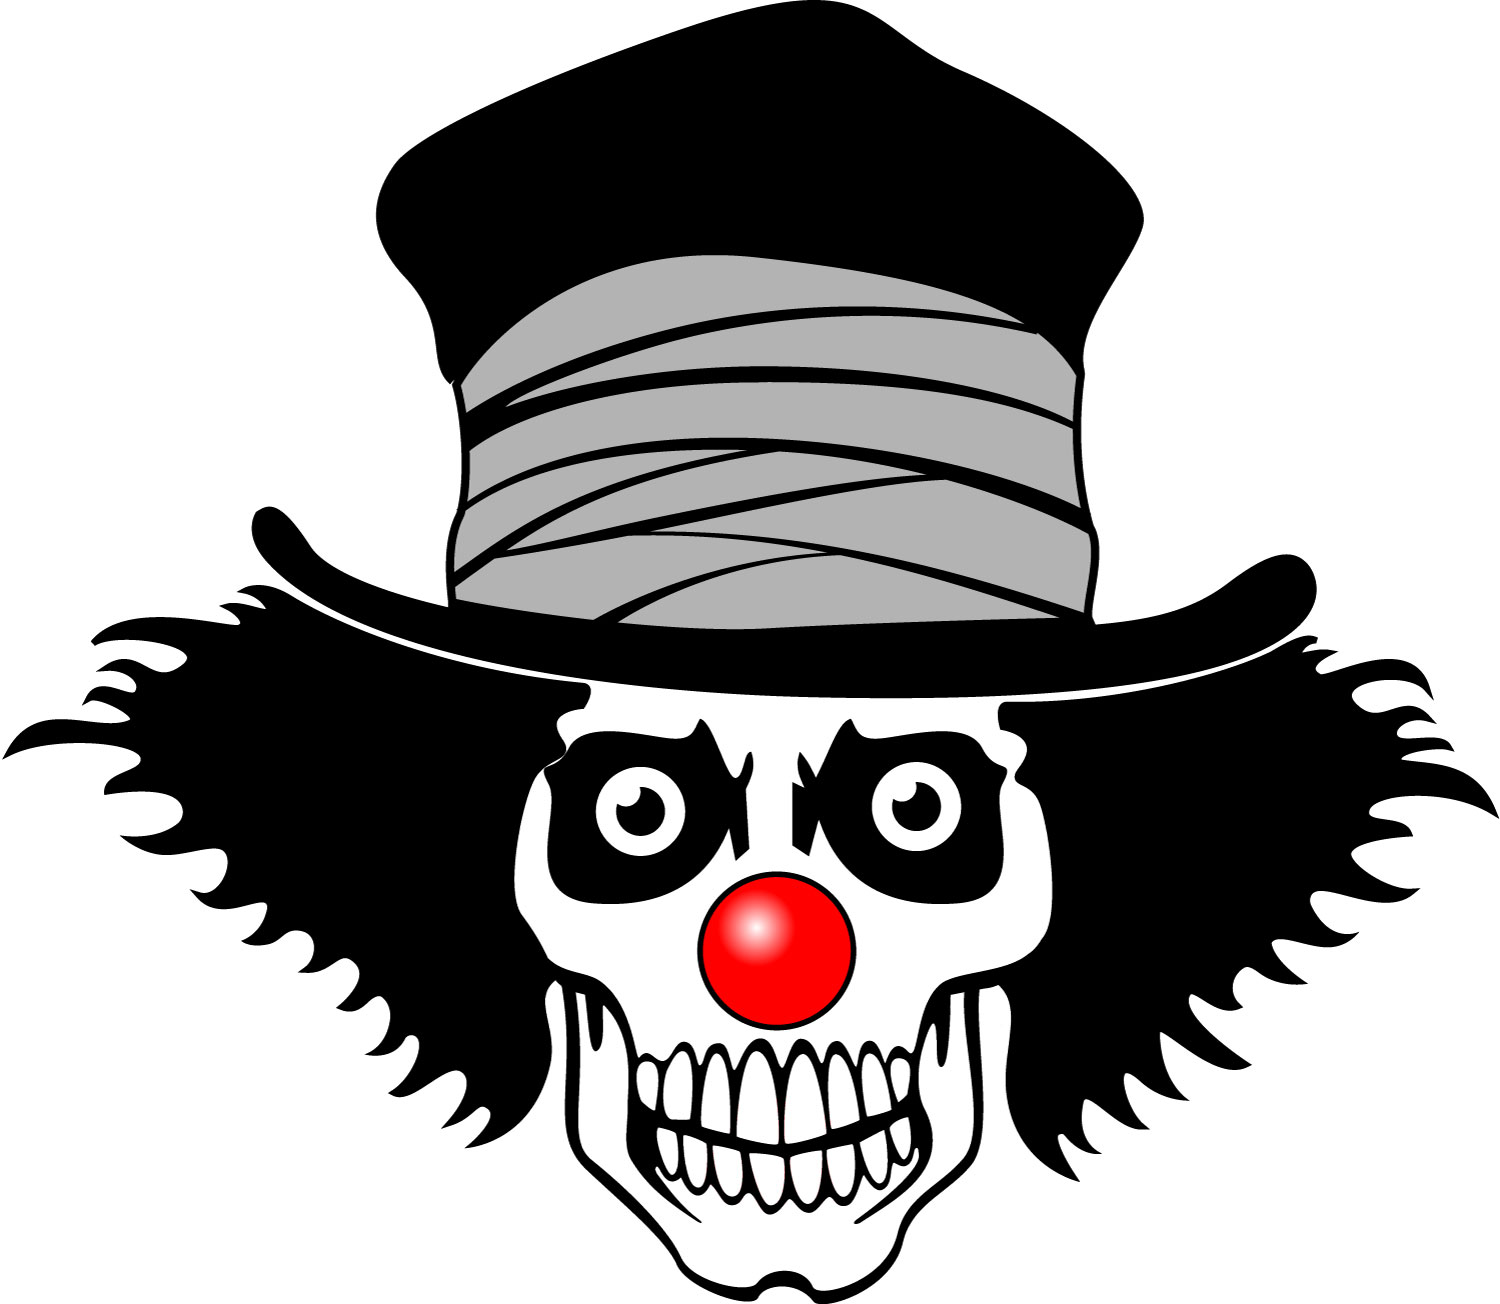 Clown Skull With Hat Vector